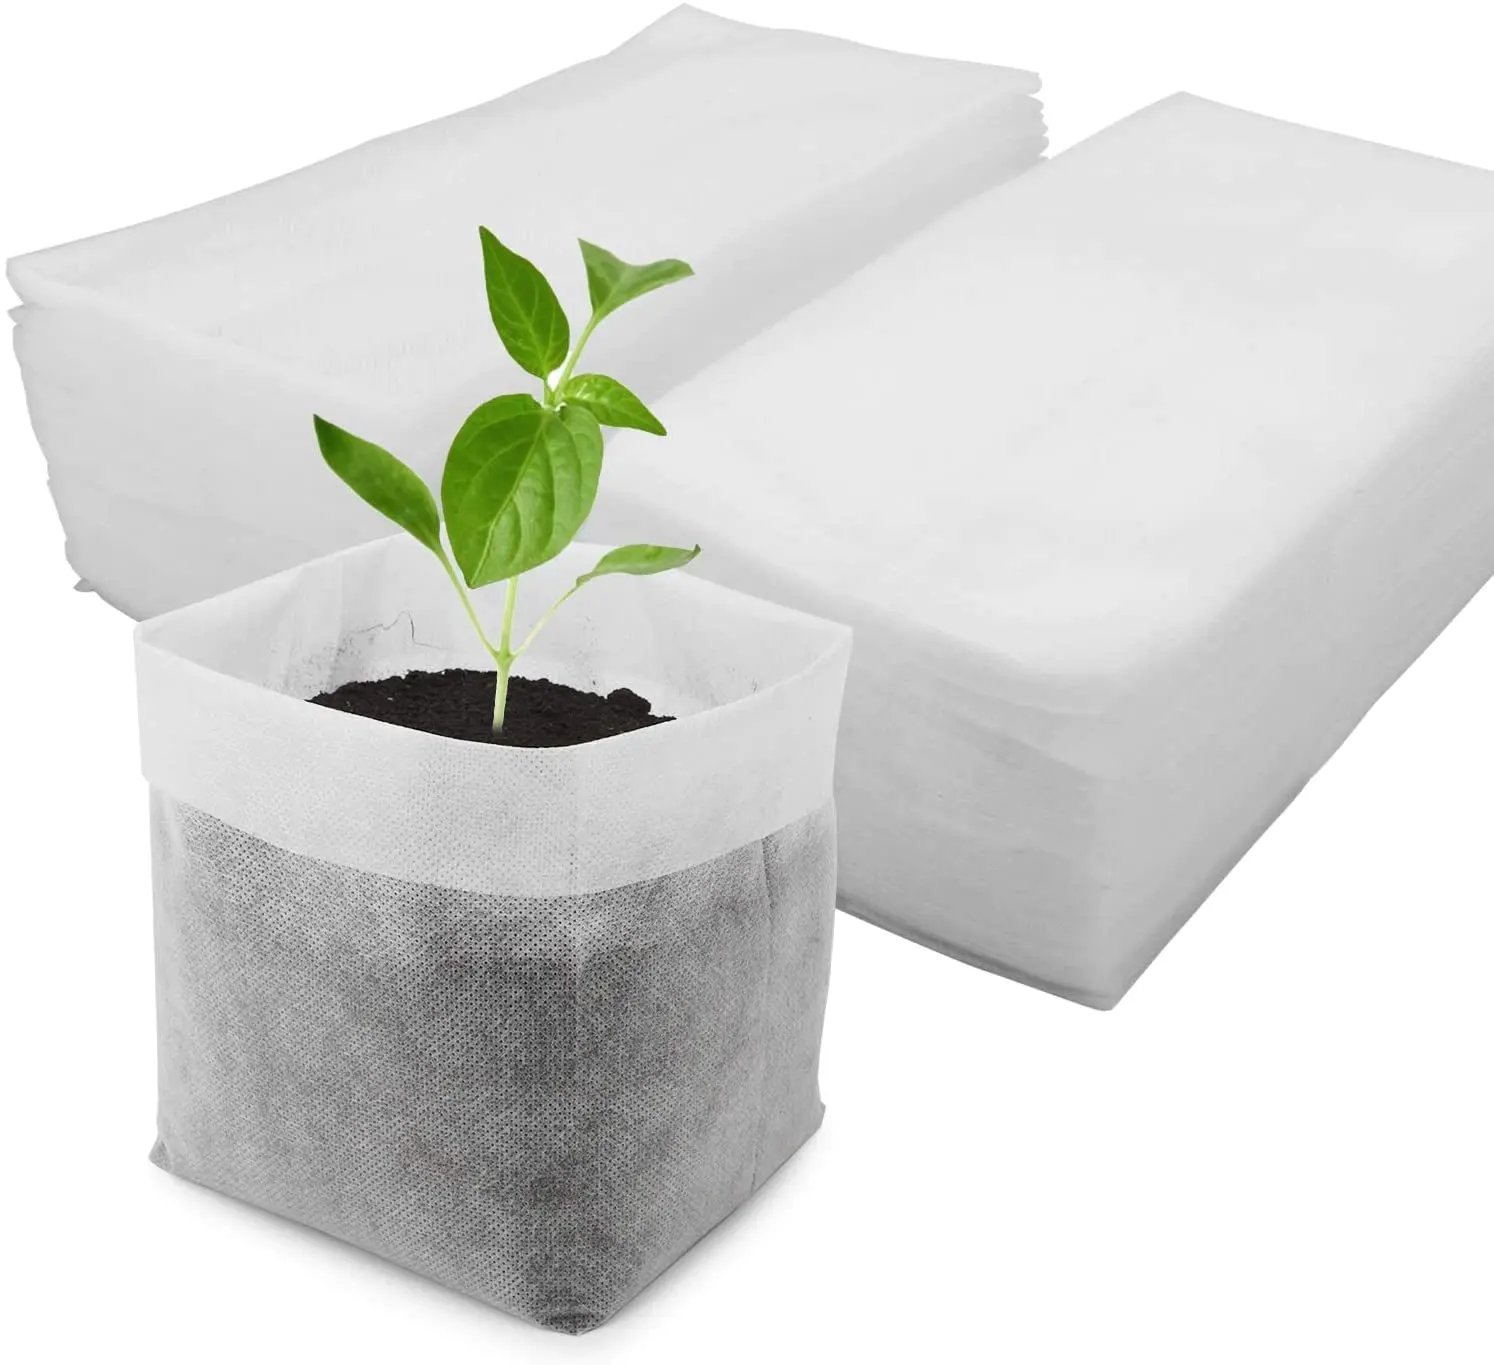 Biodegradable Non-Woven Nursery Bags Plant Grow BagsBiodegradable Non-Woven Nursery Bags Plant Grow Bags